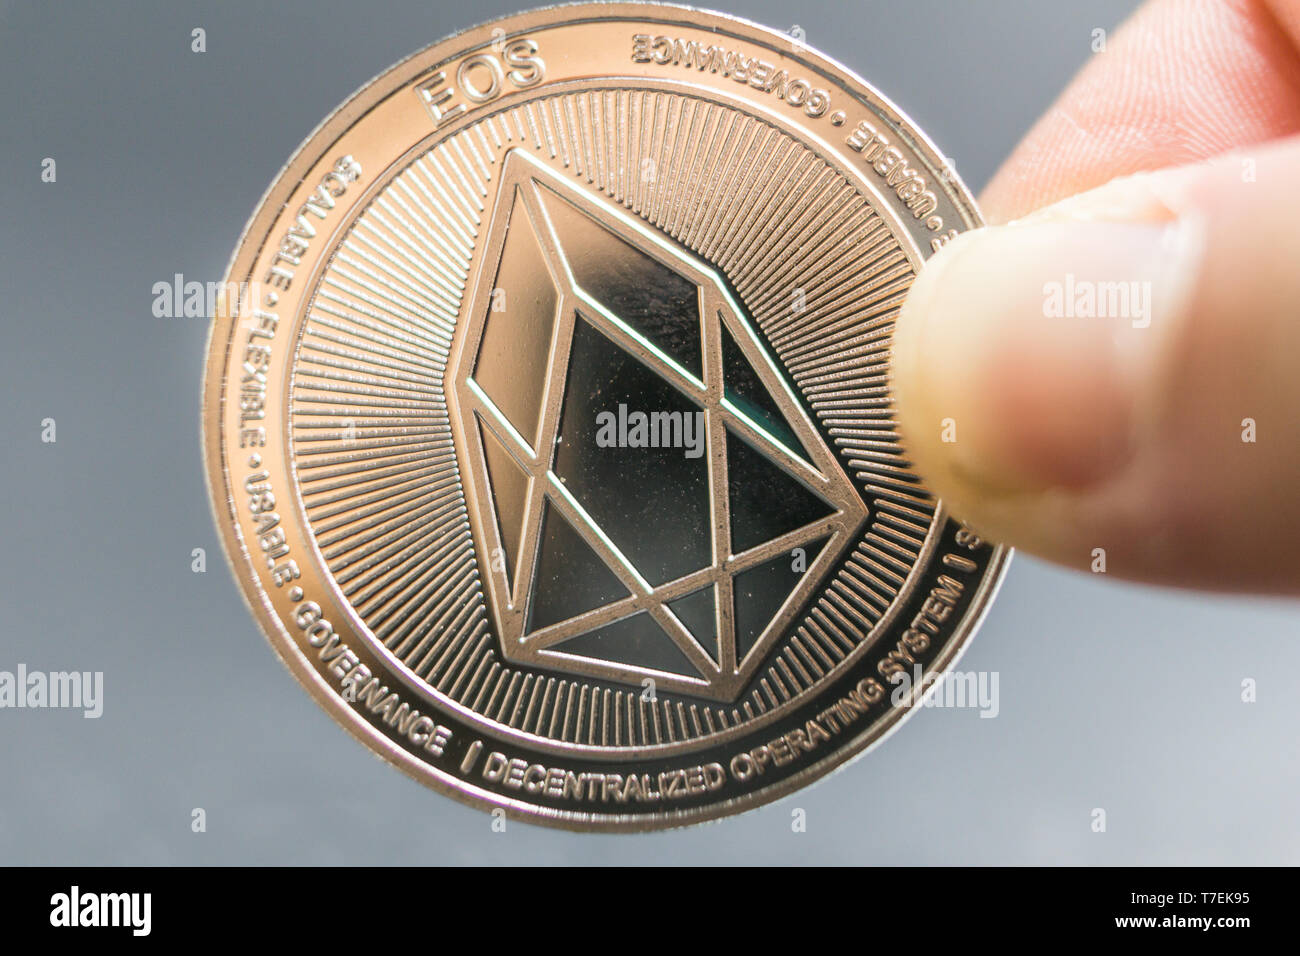 EOS, Crypto currency silver coin, Macro shot of Iota coin isolated on background, cut out Blockchain technology, Stock Photo